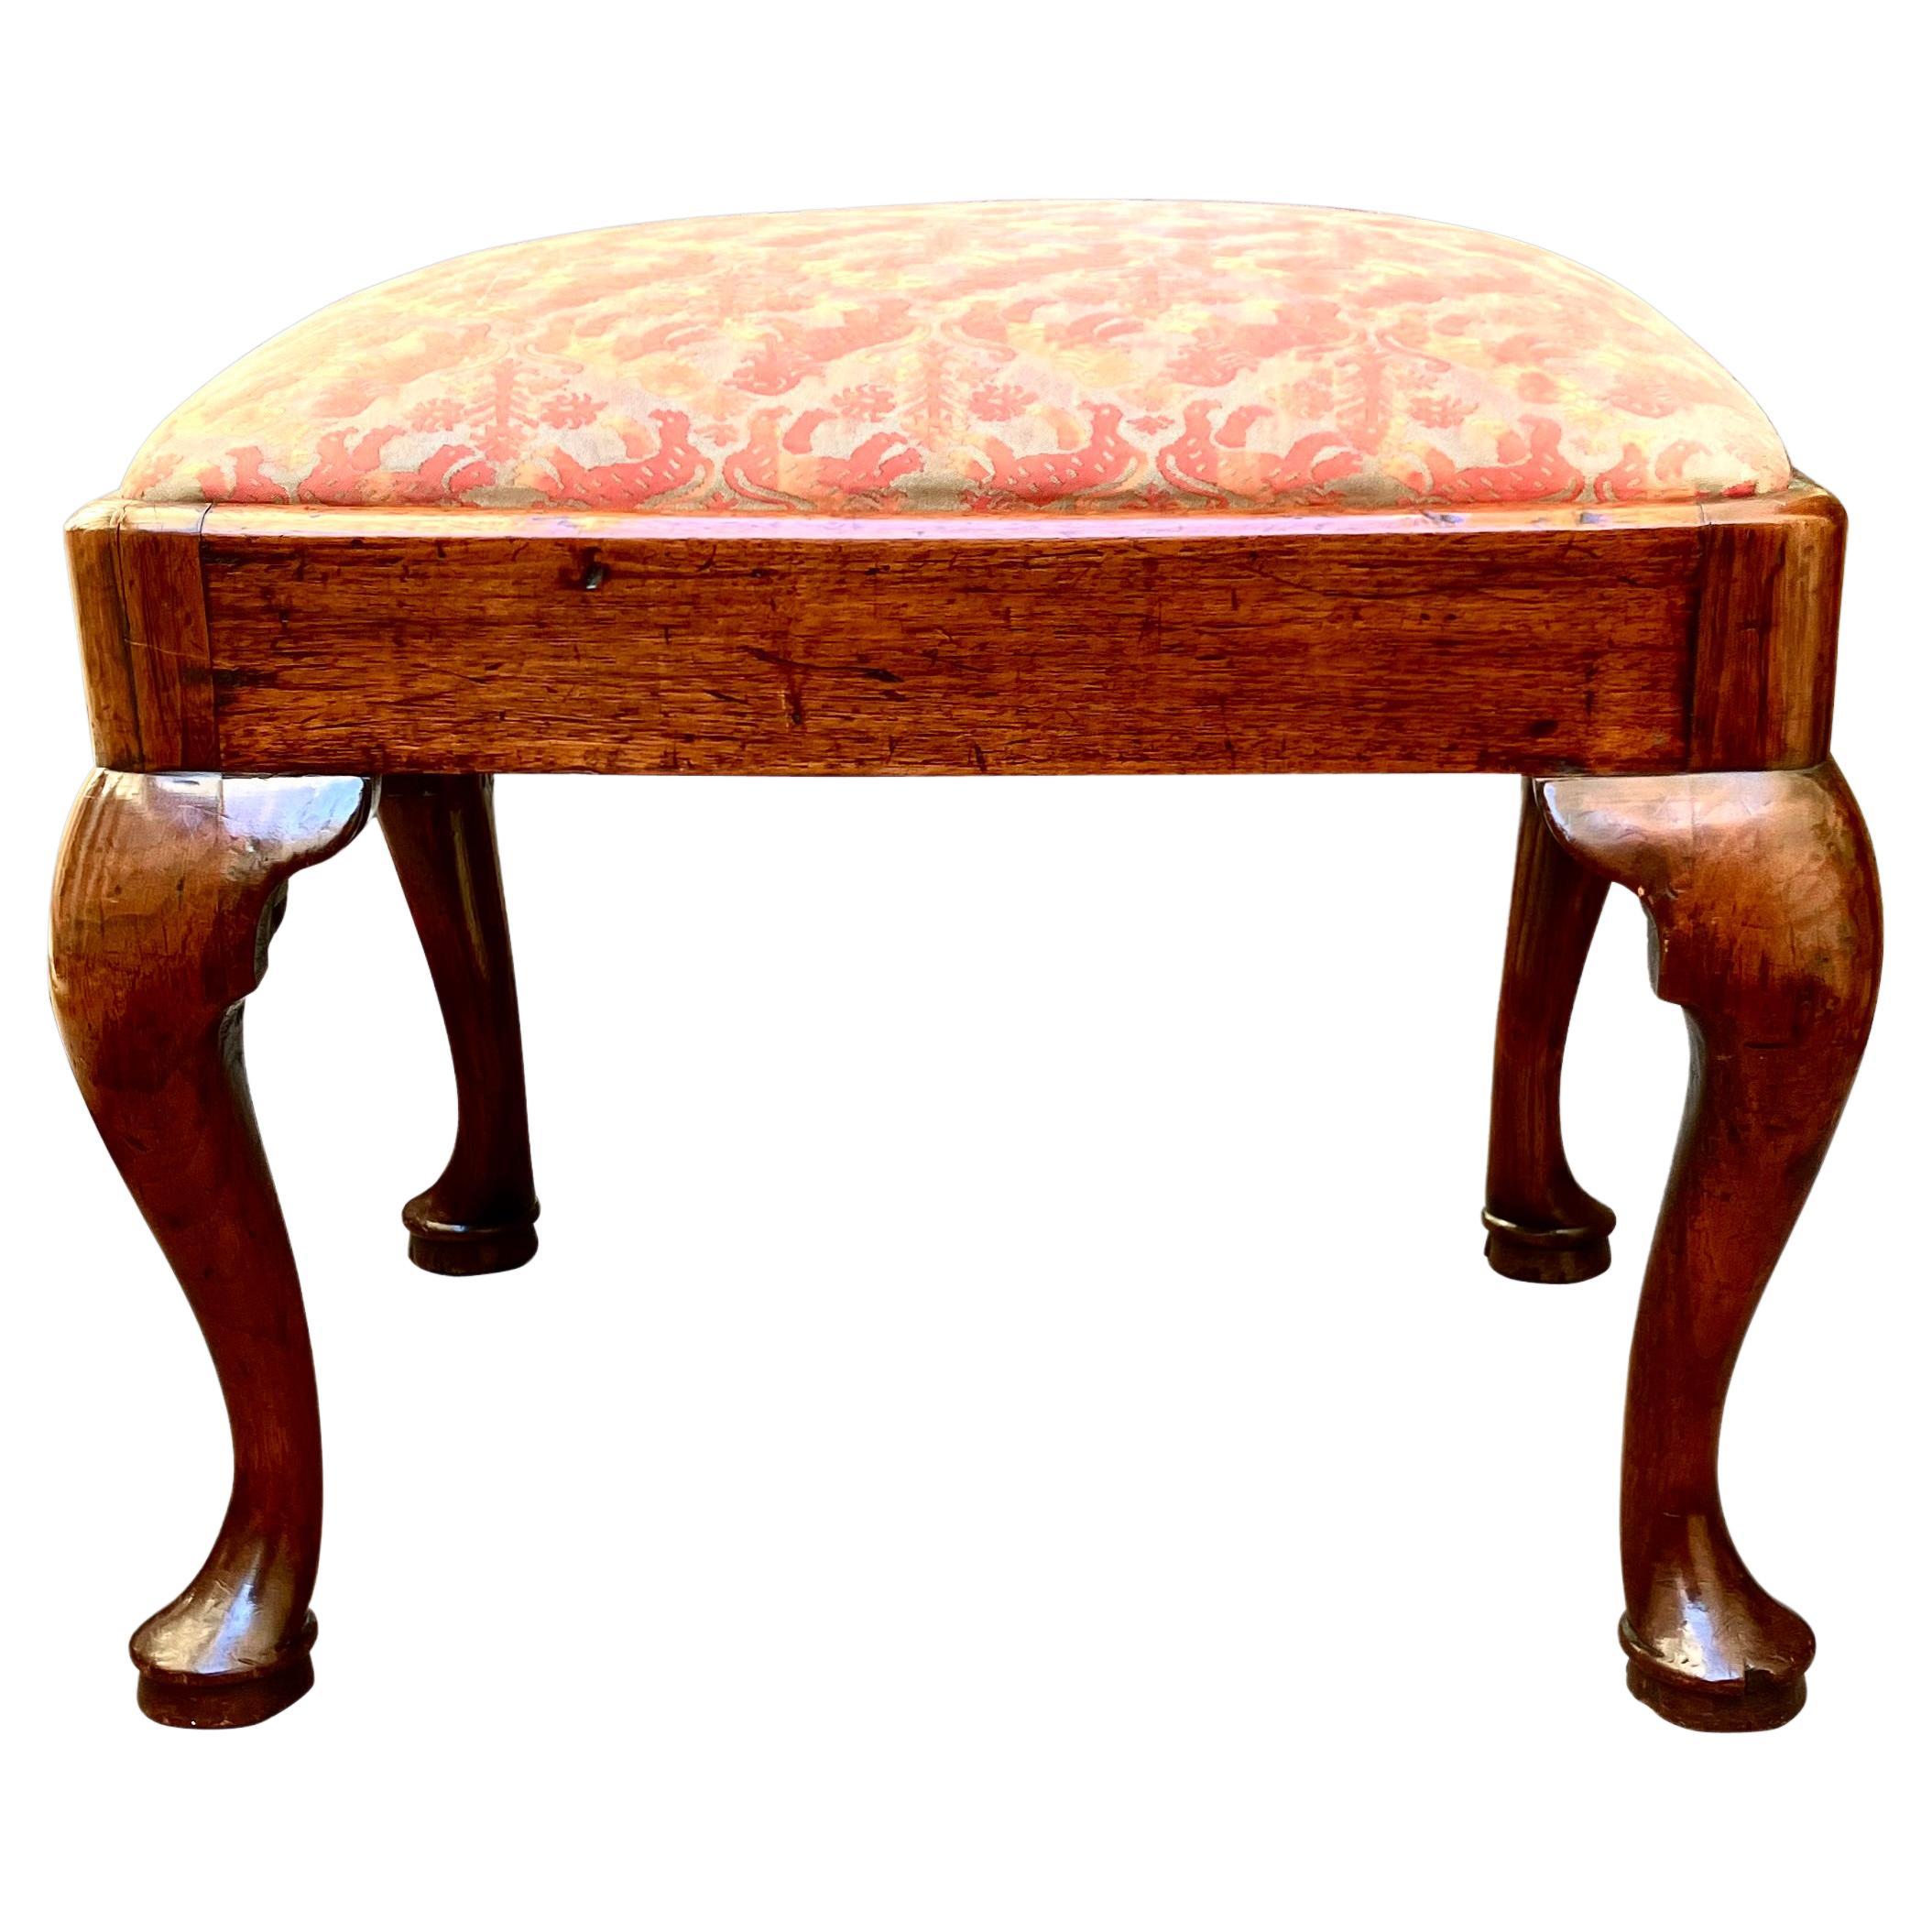 English George I Period Small Bench Now Upholstered in Fortuny Fabric  For Sale